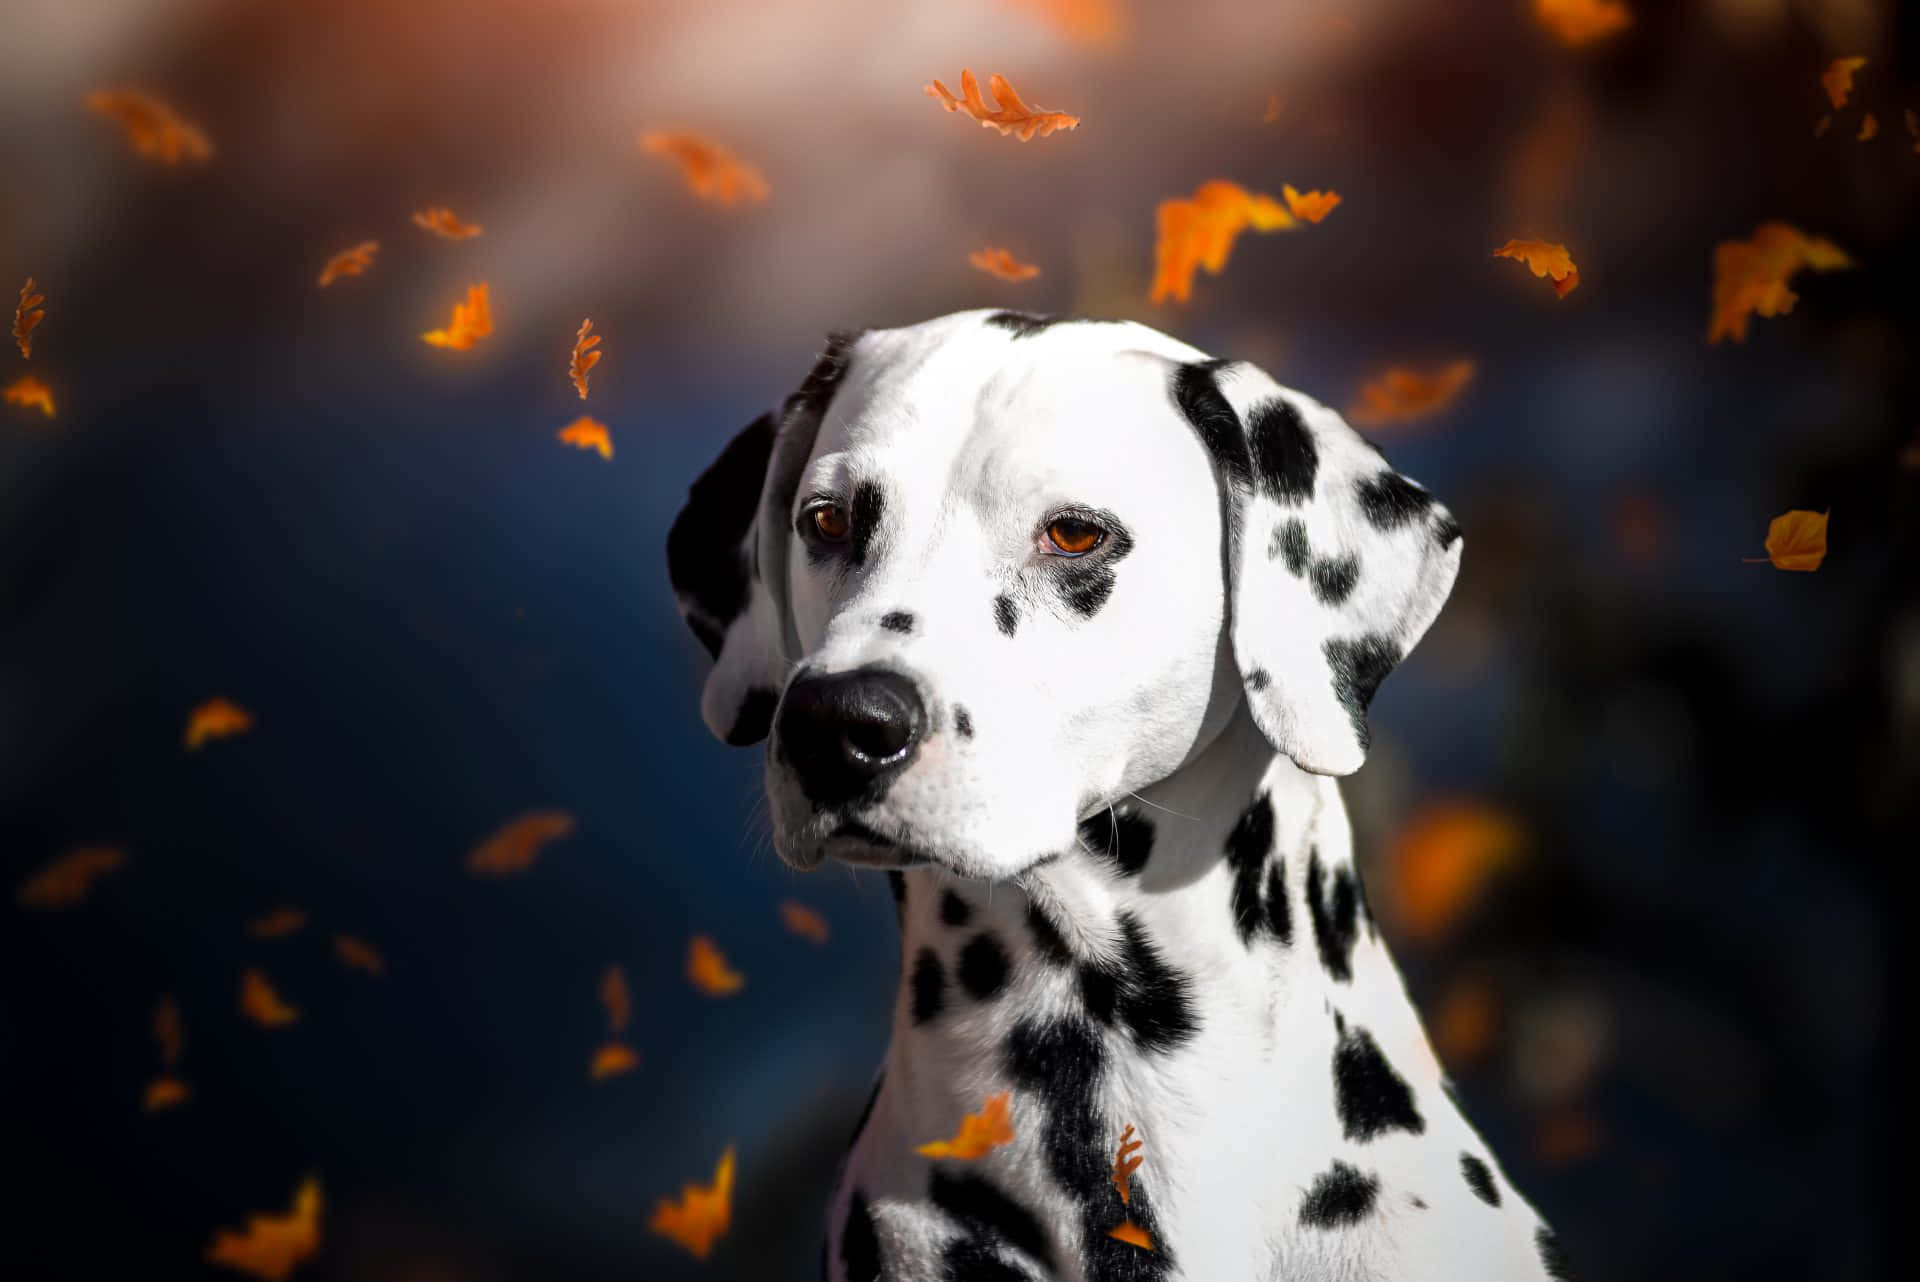 A Dalmatian Dog Is Standing In The Background With Leaves